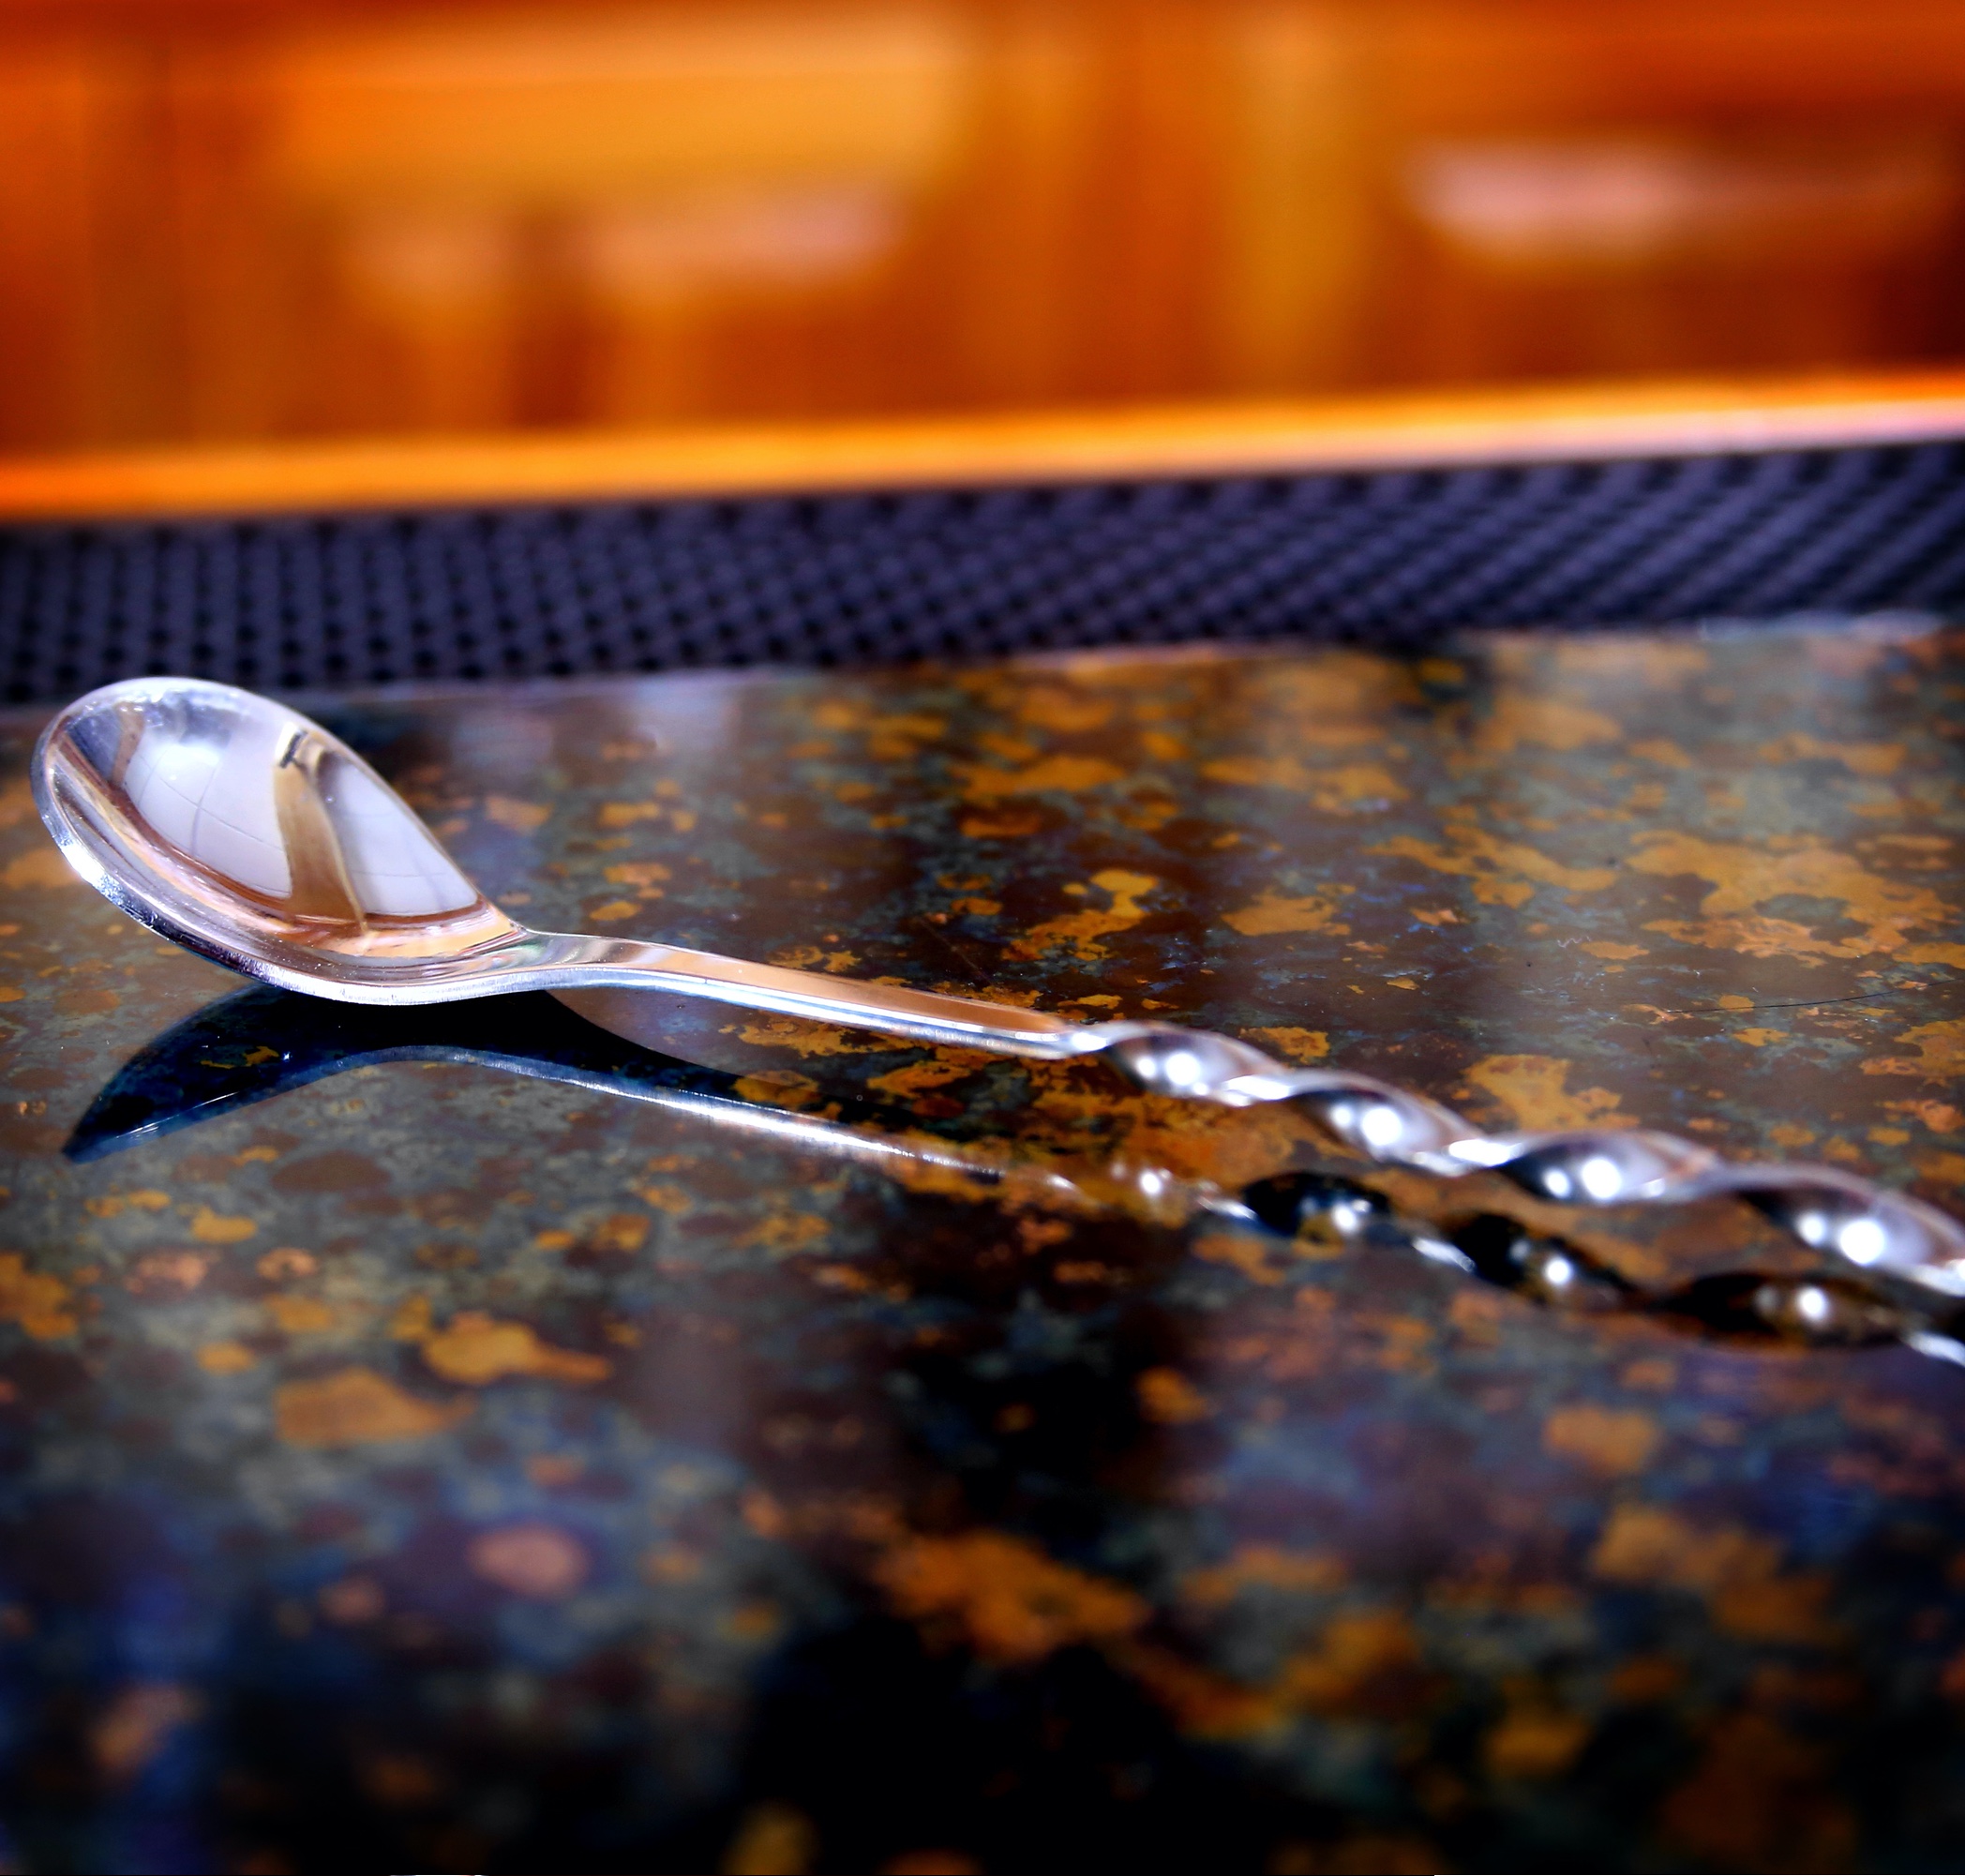 https://awesomedrinks.com/wp-content/uploads/2020/11/11_inch_bar_spoon_table.jpg